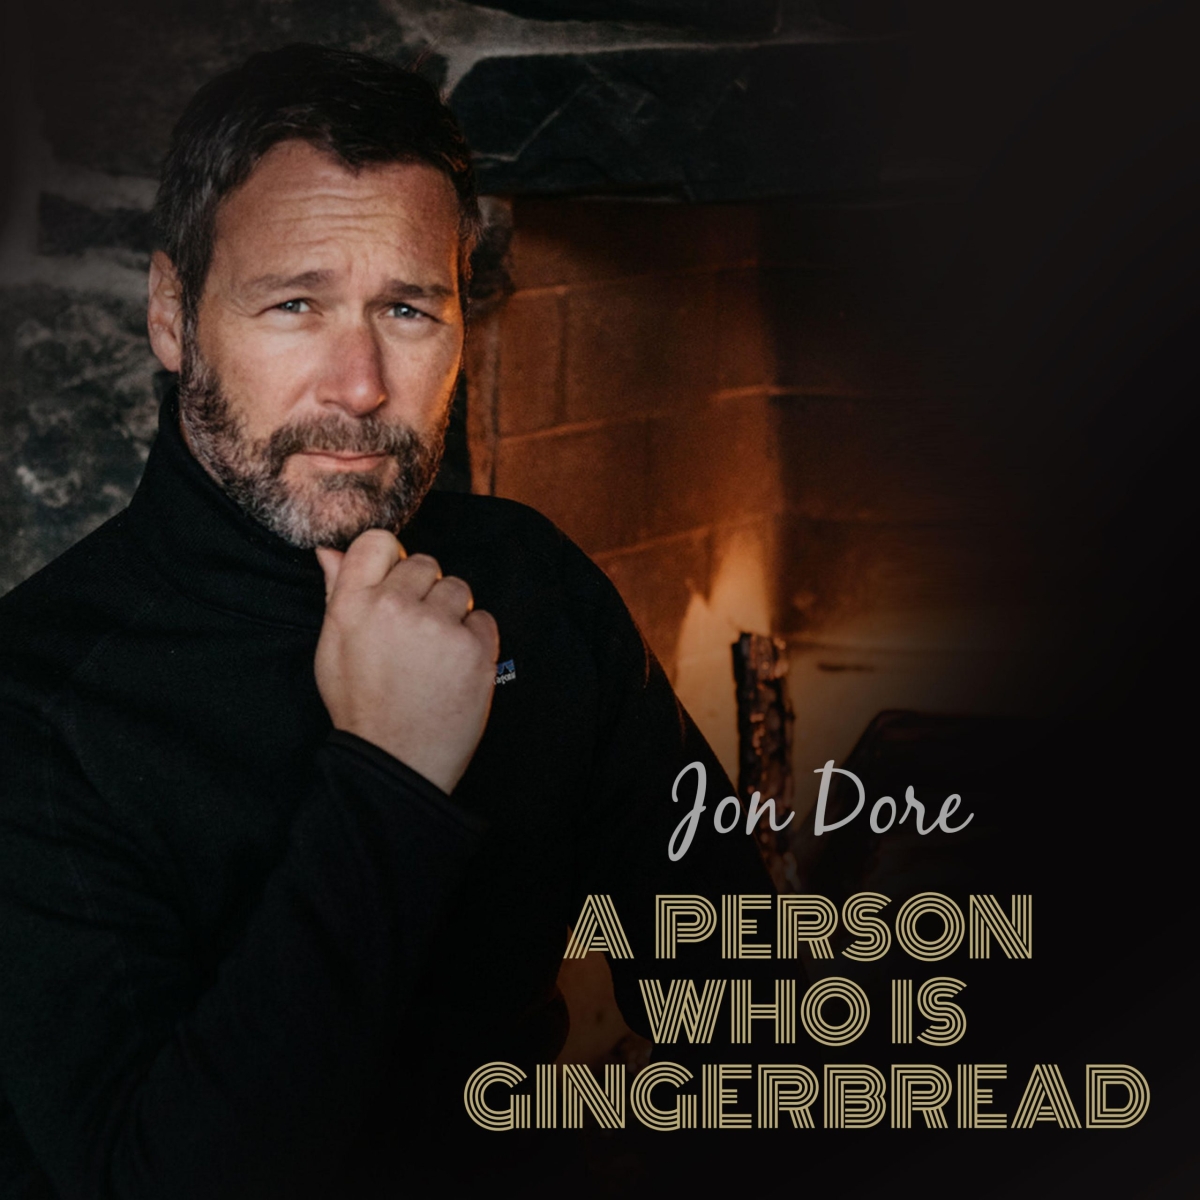 Jon Dore - A Person Who is Gingerbread